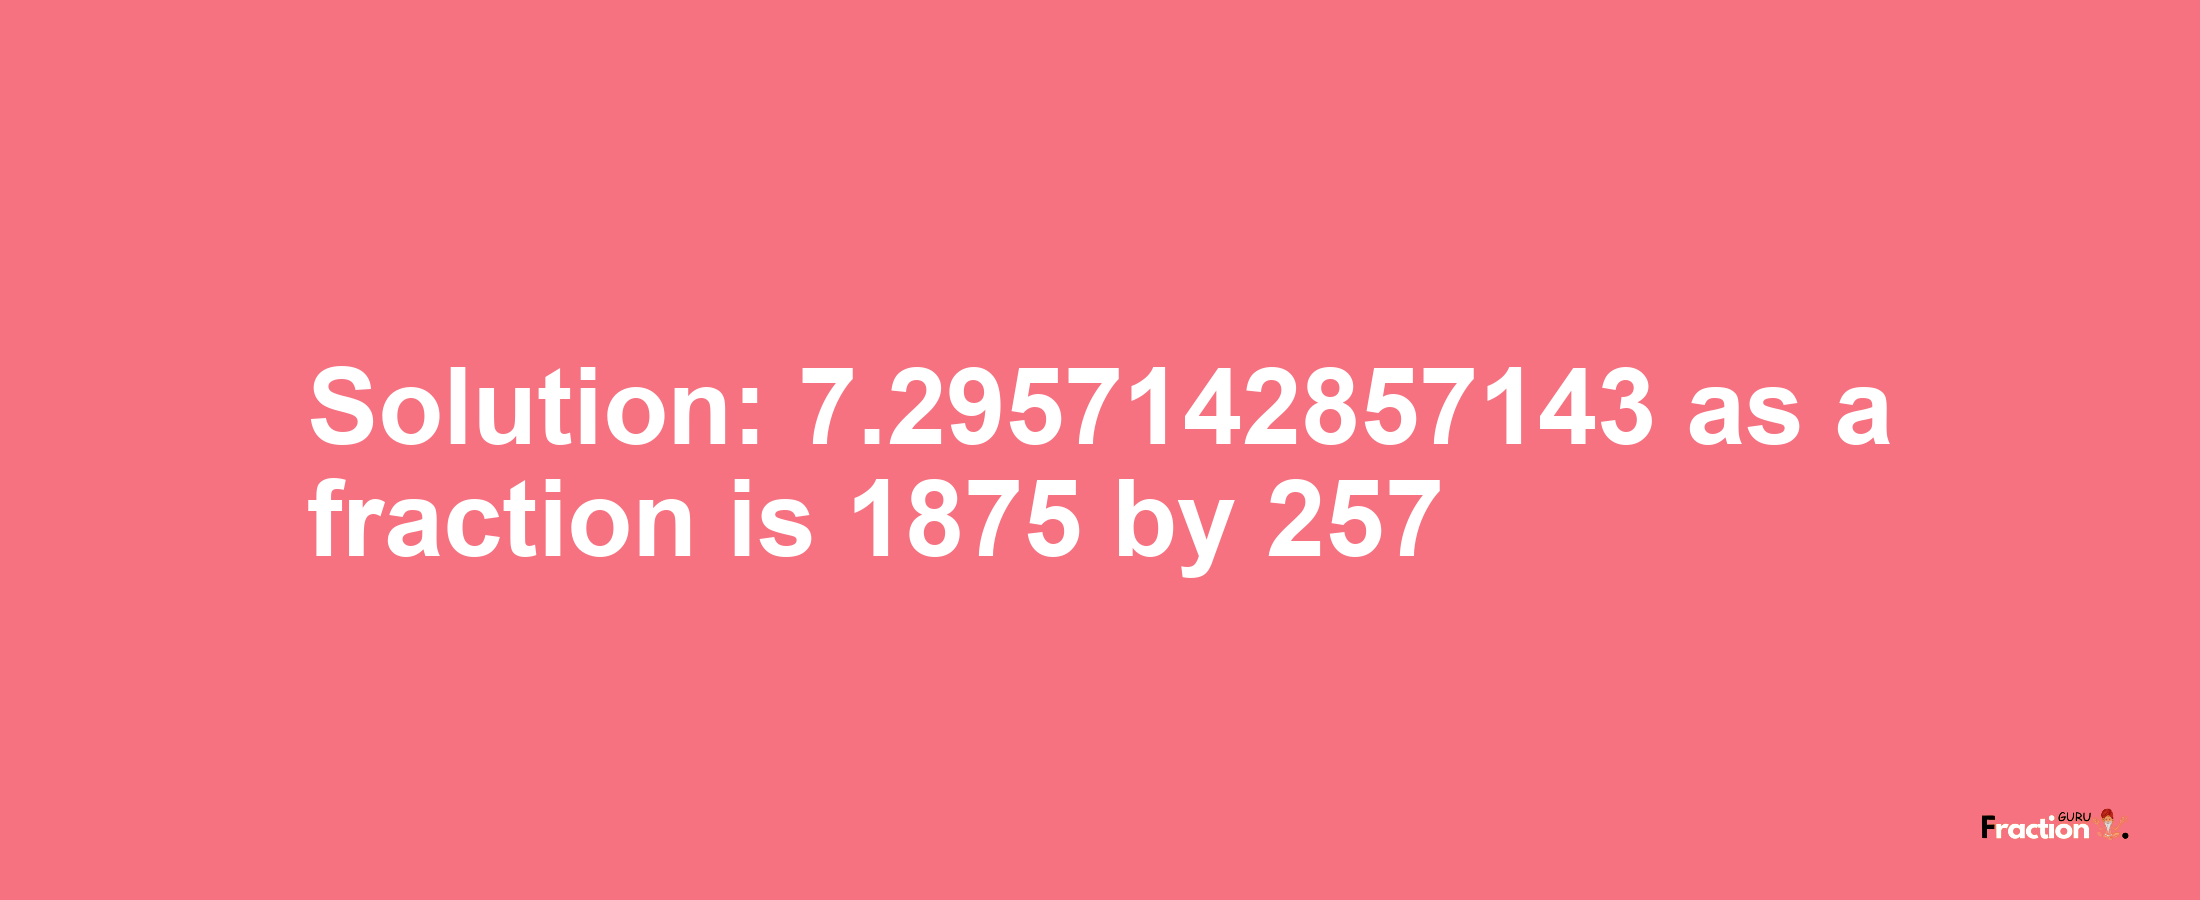 Solution:7.2957142857143 as a fraction is 1875/257